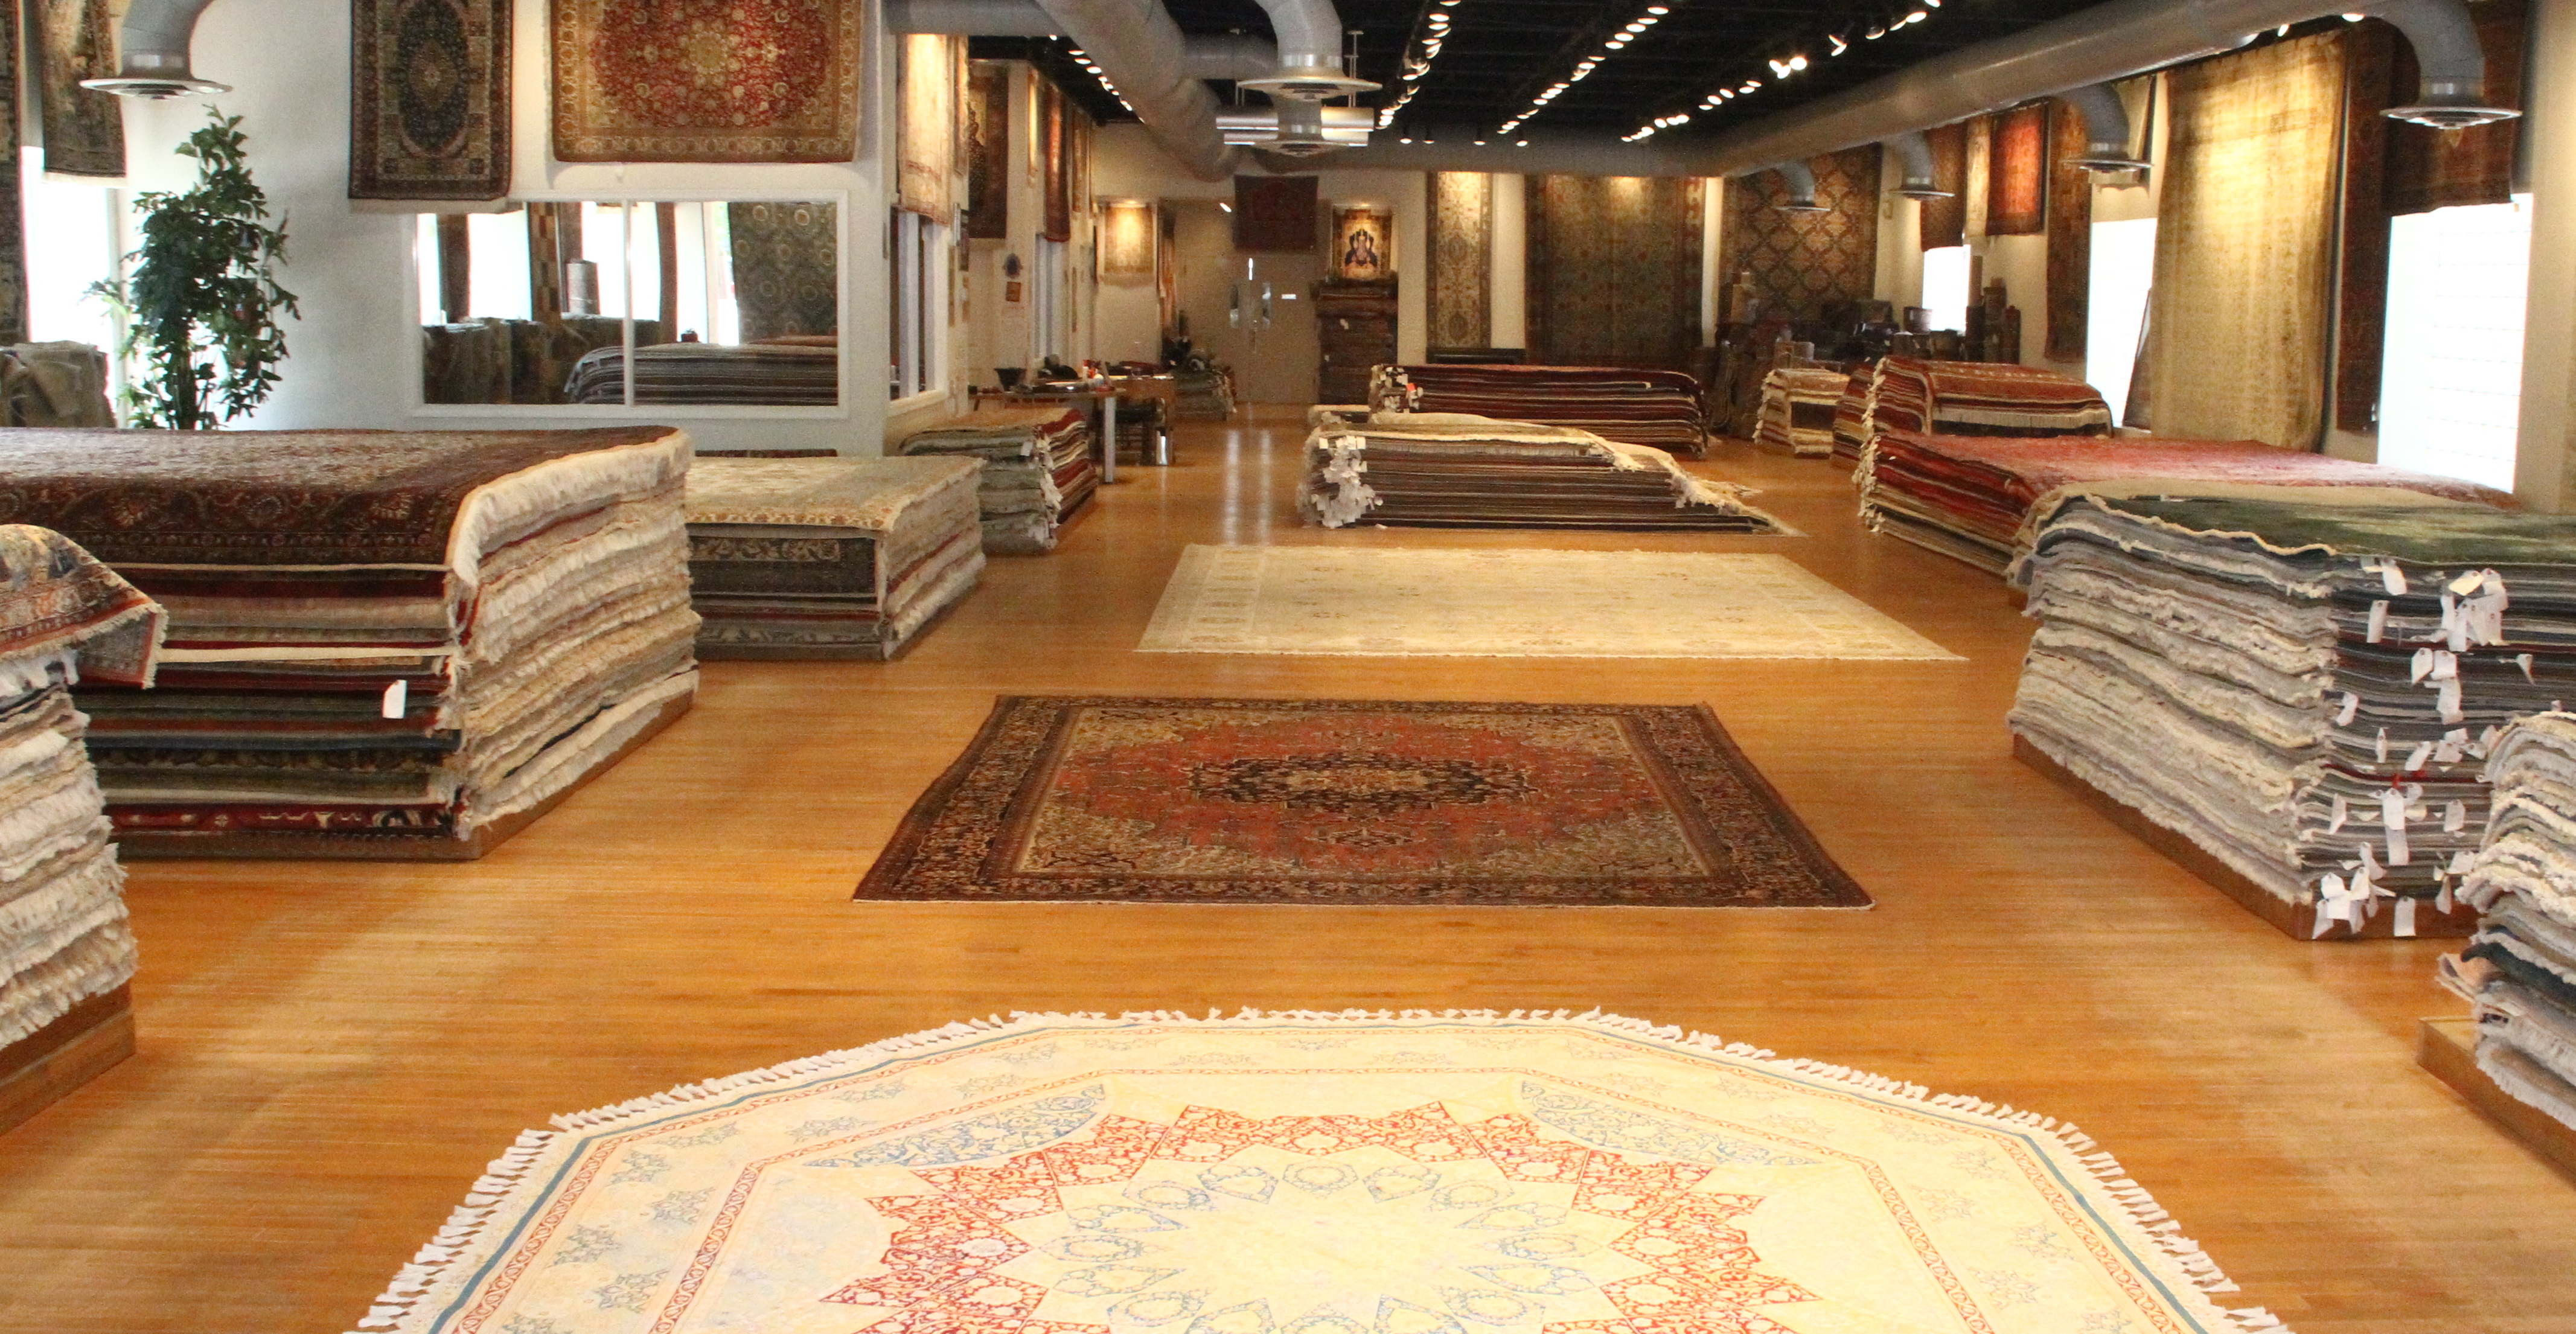 How to Choose an Oriental Rug: 5 Design Tips